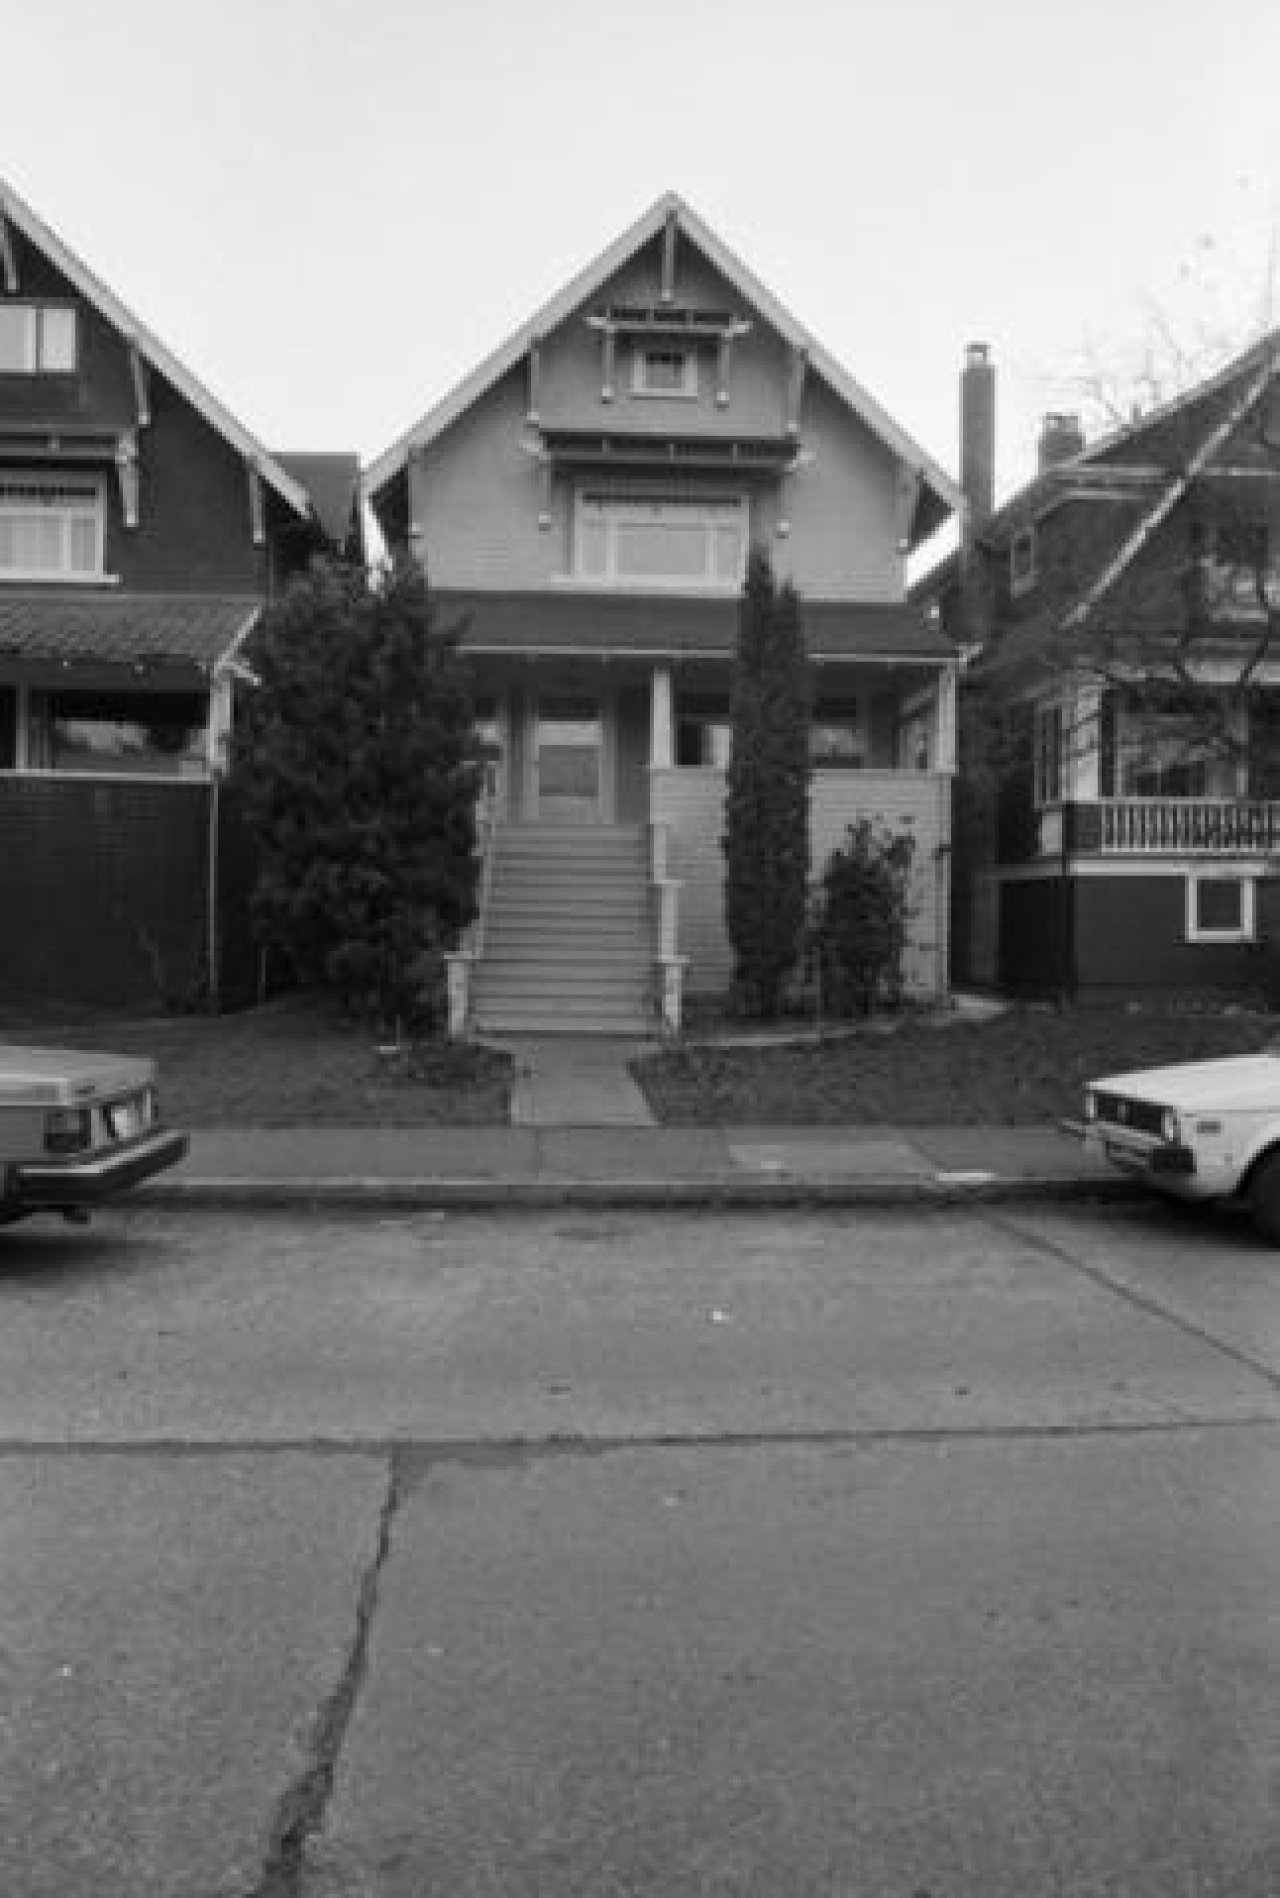 2912-2914 West 3rd Ave c. 1985

Source: City of Vancouver Archives Item : CVA 790-1553 - 2914-2912 West 3rd Avenue